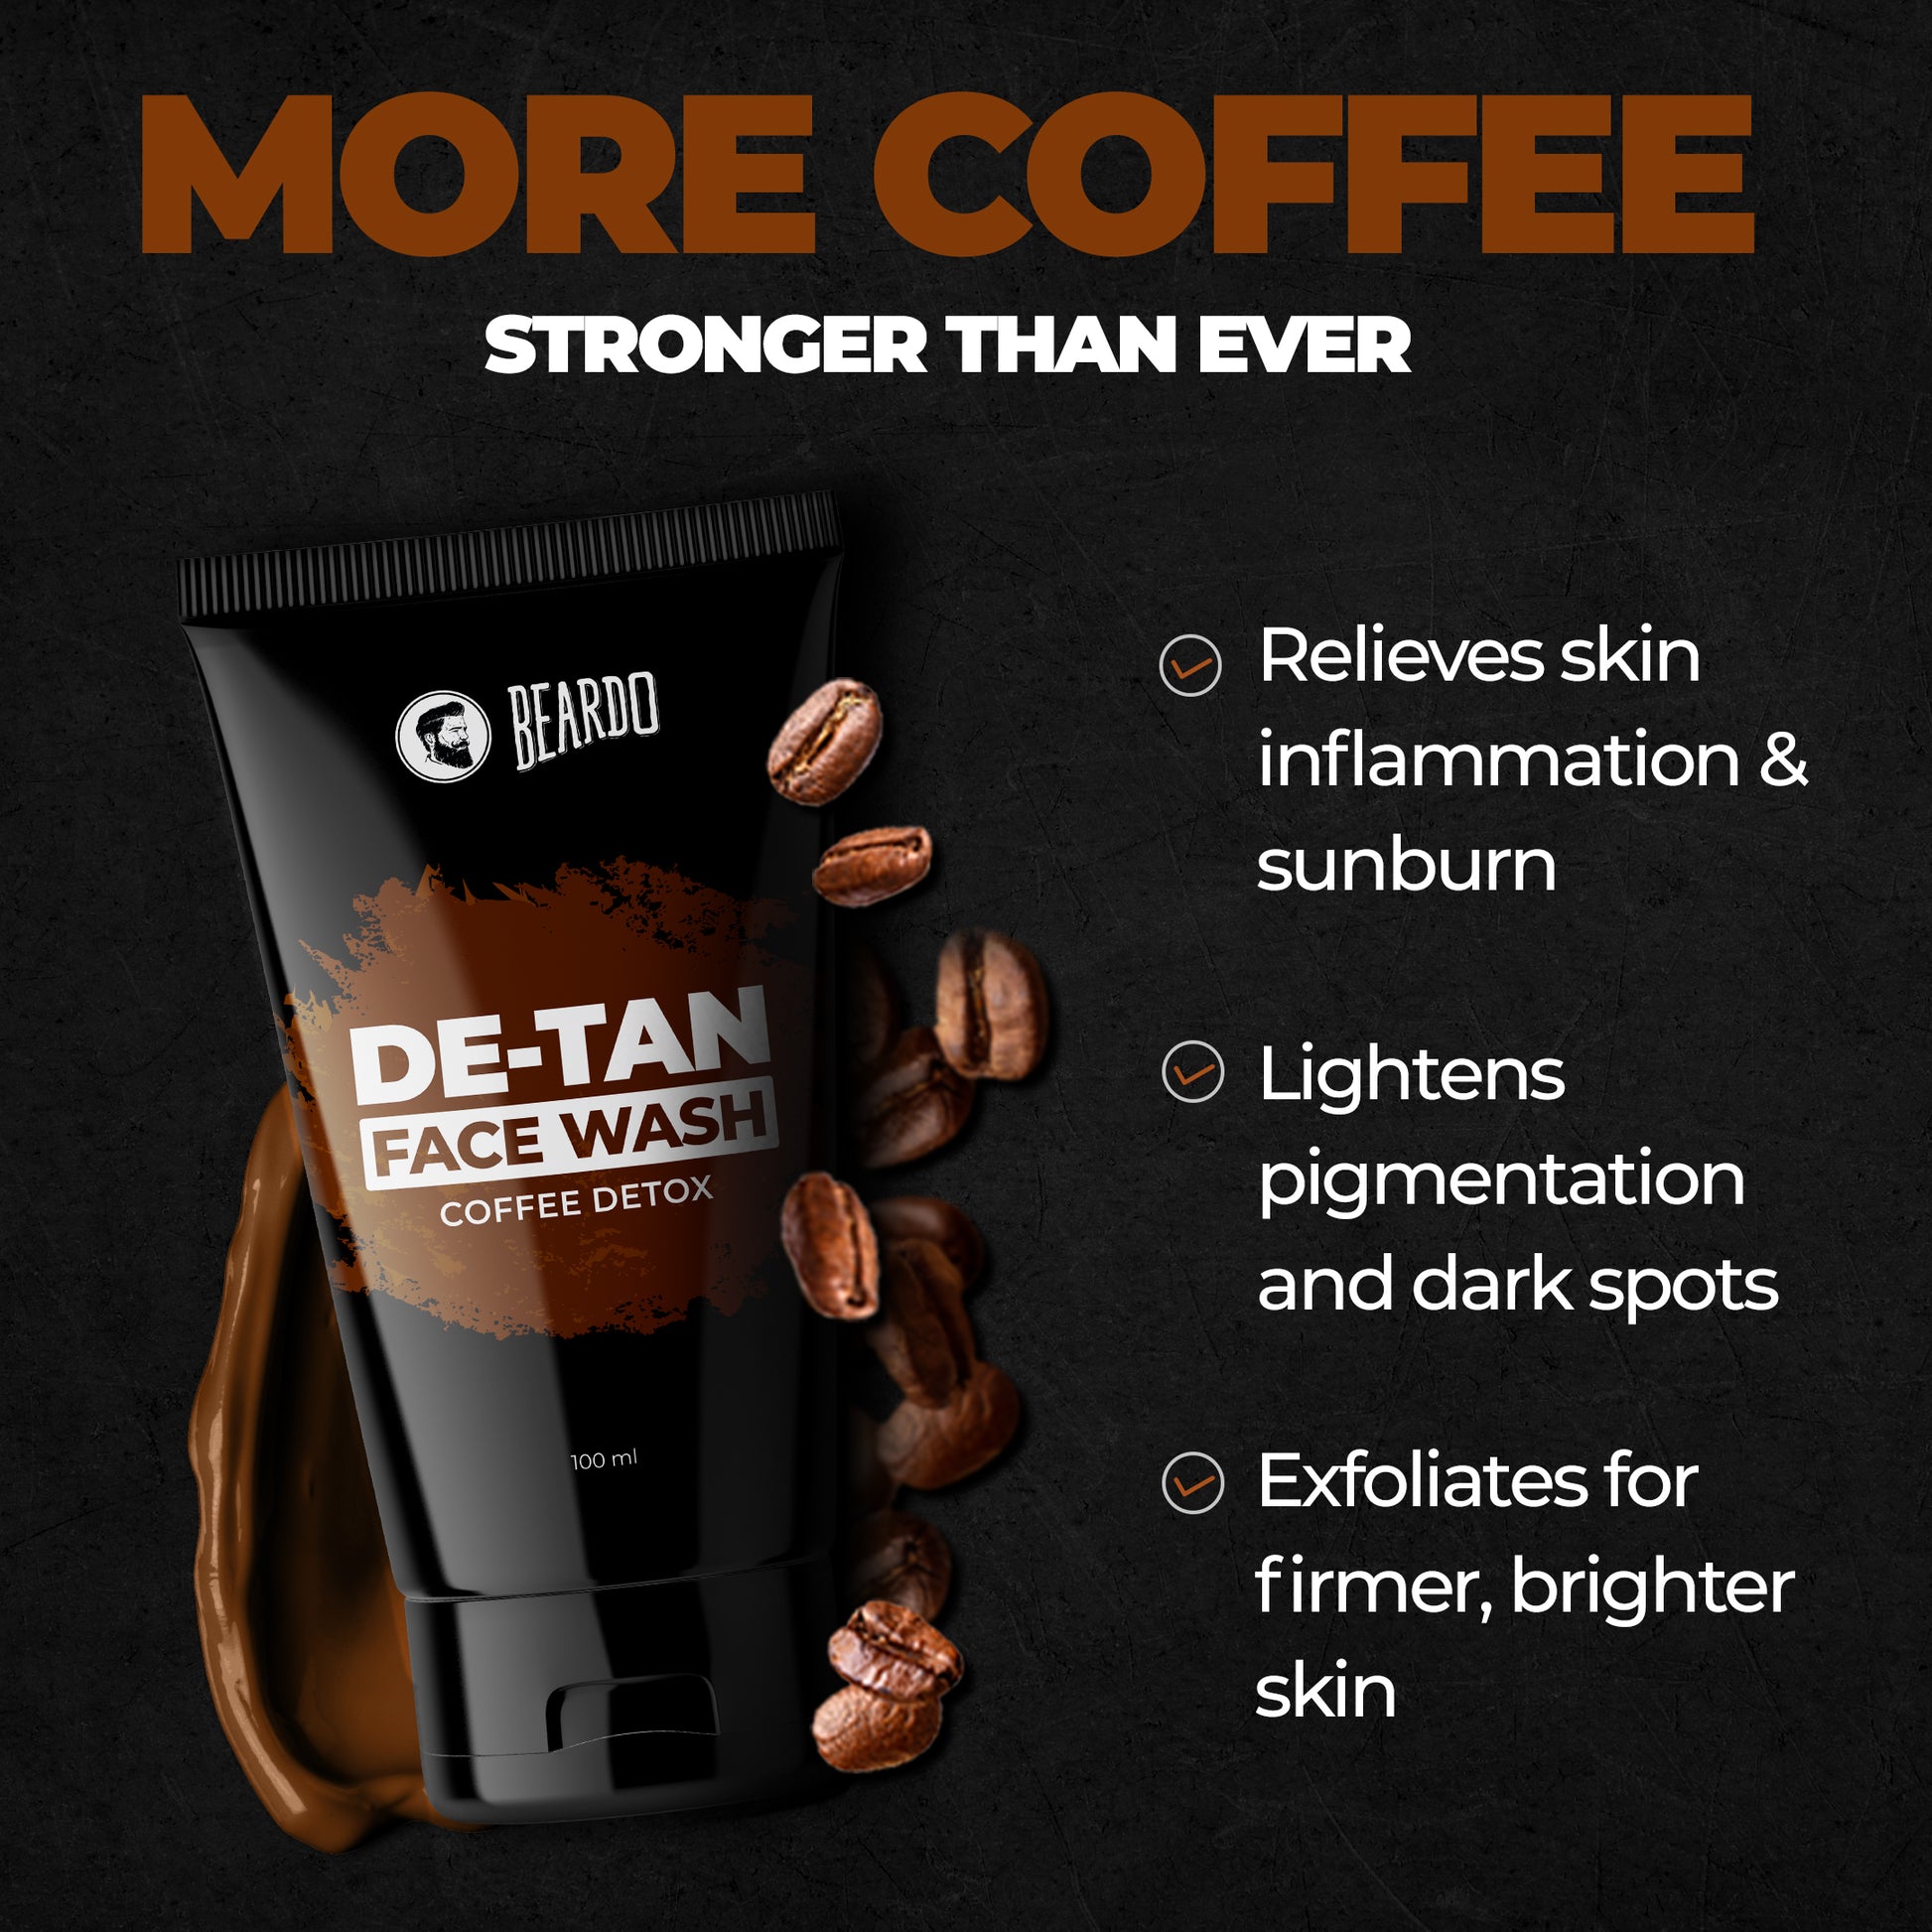 100ml, coffee face wash benefits, What is best for removing tan?, How do I remove 100% tan?, Is it possible to remove 100% tan? Which brand is best for Detan?, Does Detan Facewash work?, What is the No 1 face wash?